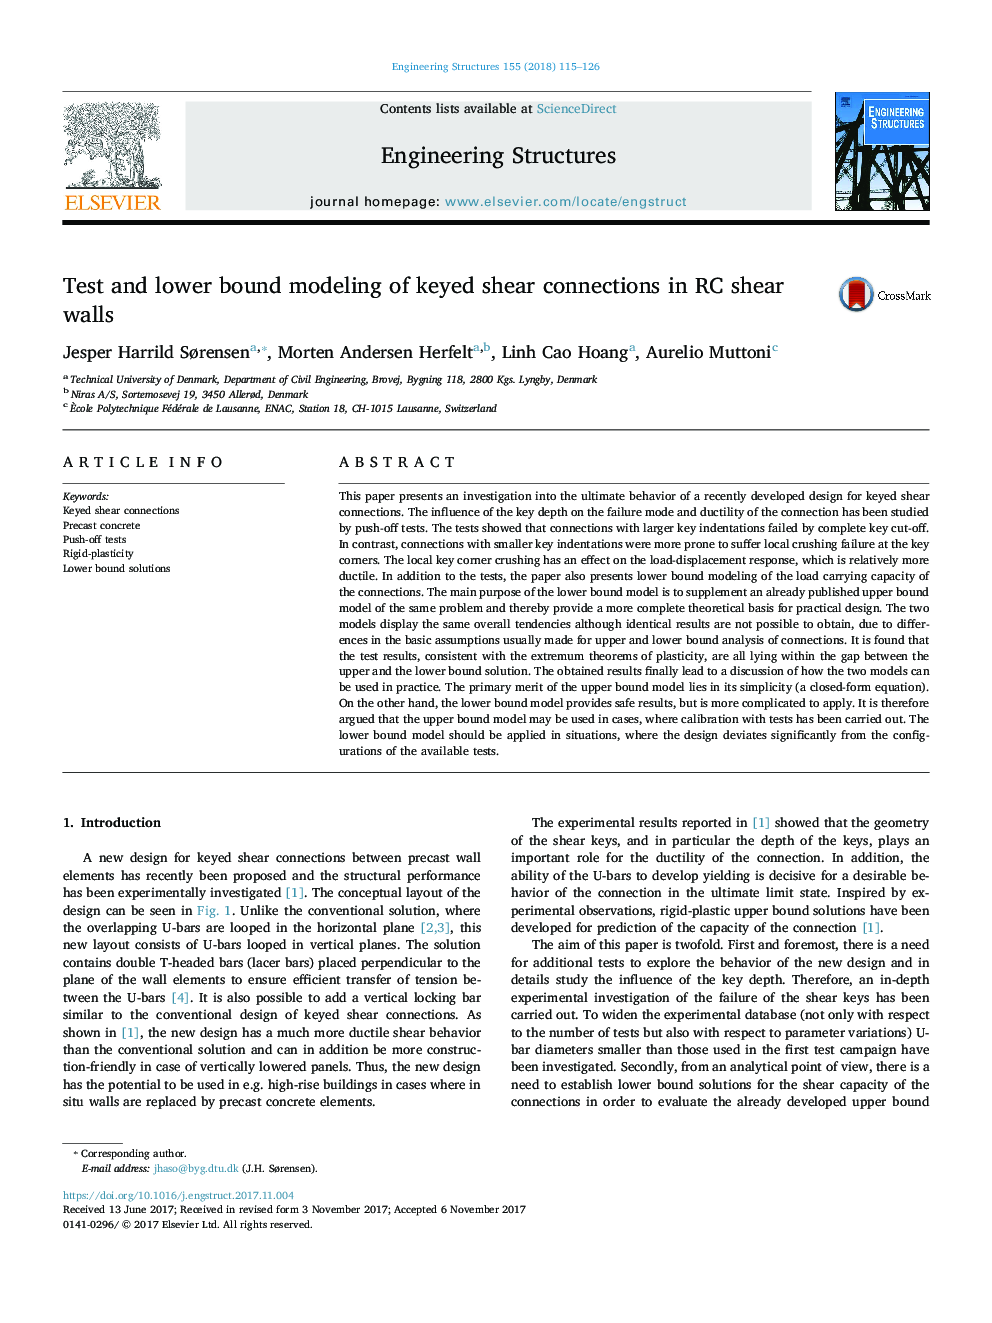 Test and lower bound modeling of keyed shear connections in RC shear walls